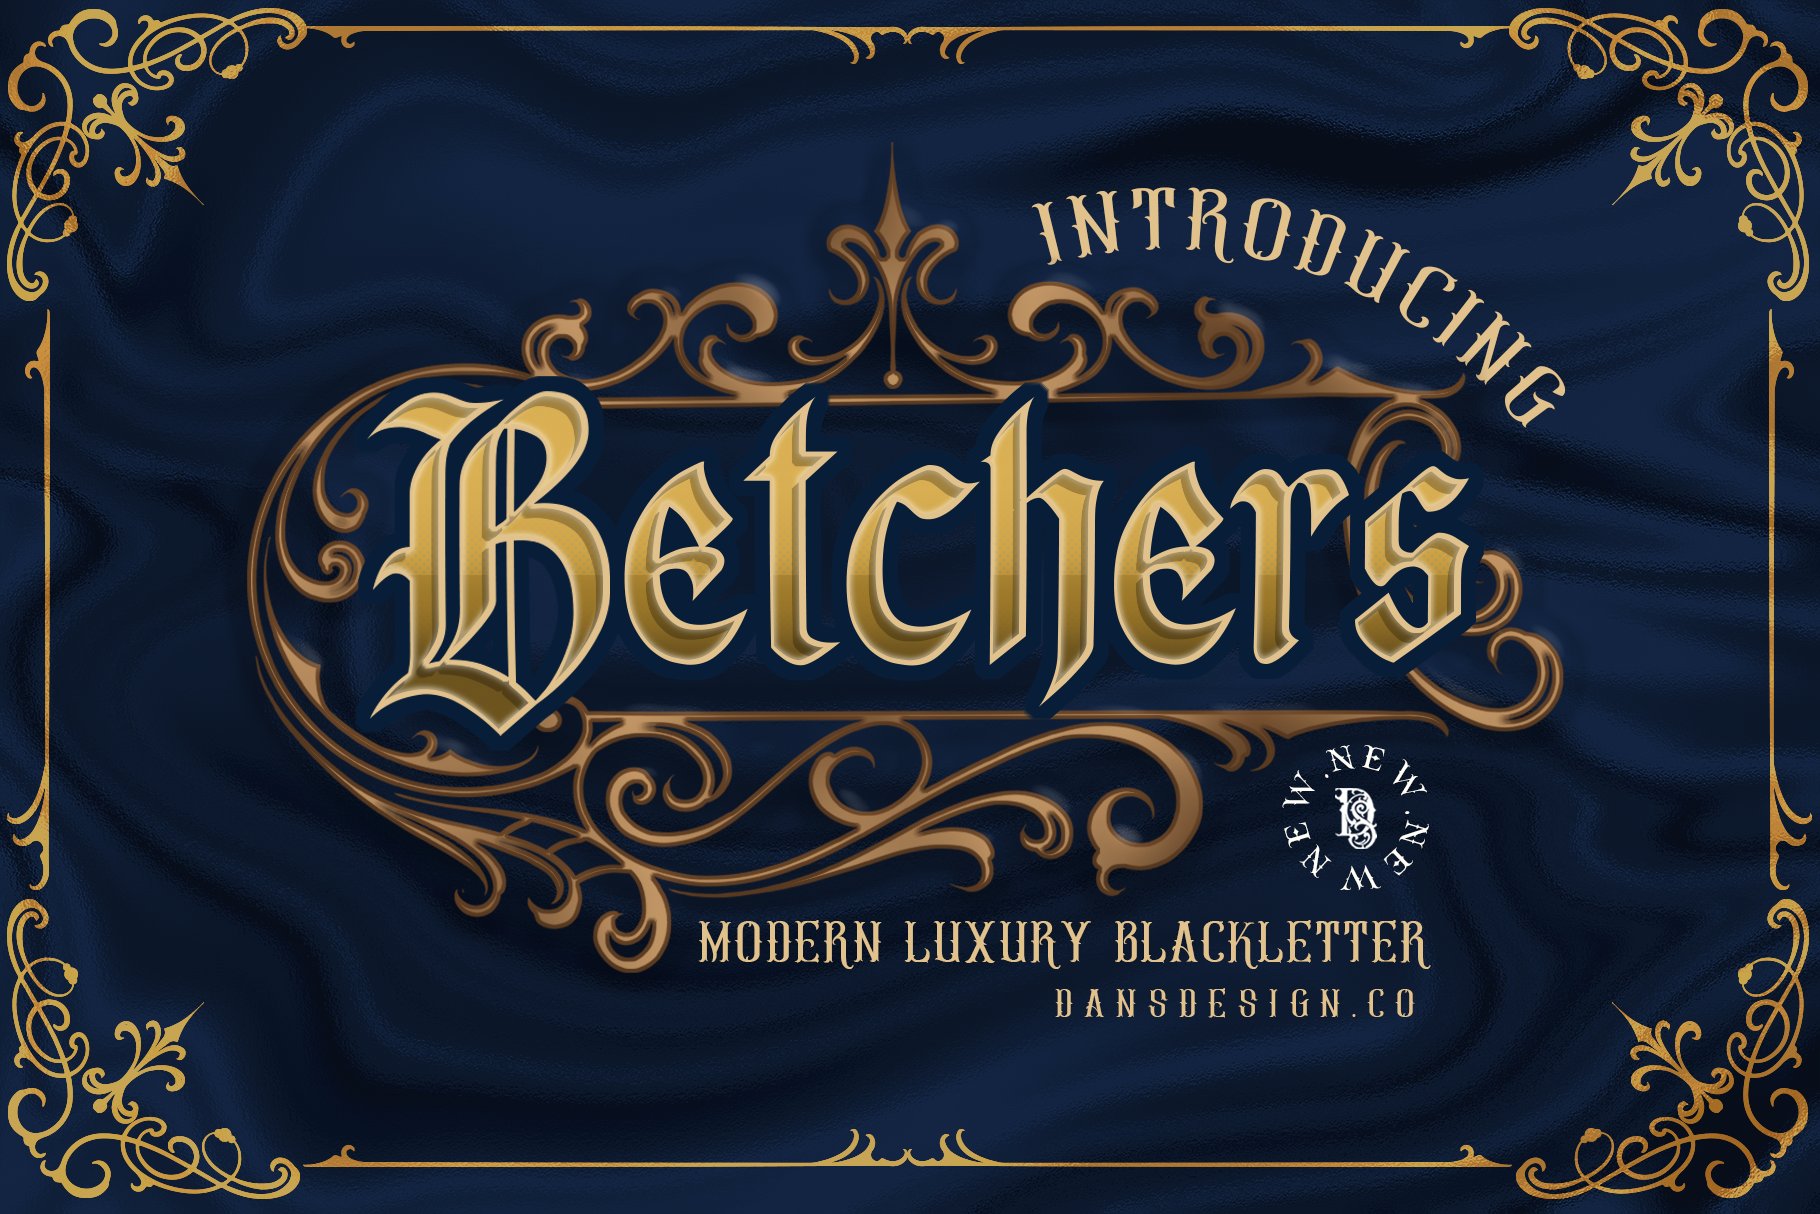 Betchers cover image.